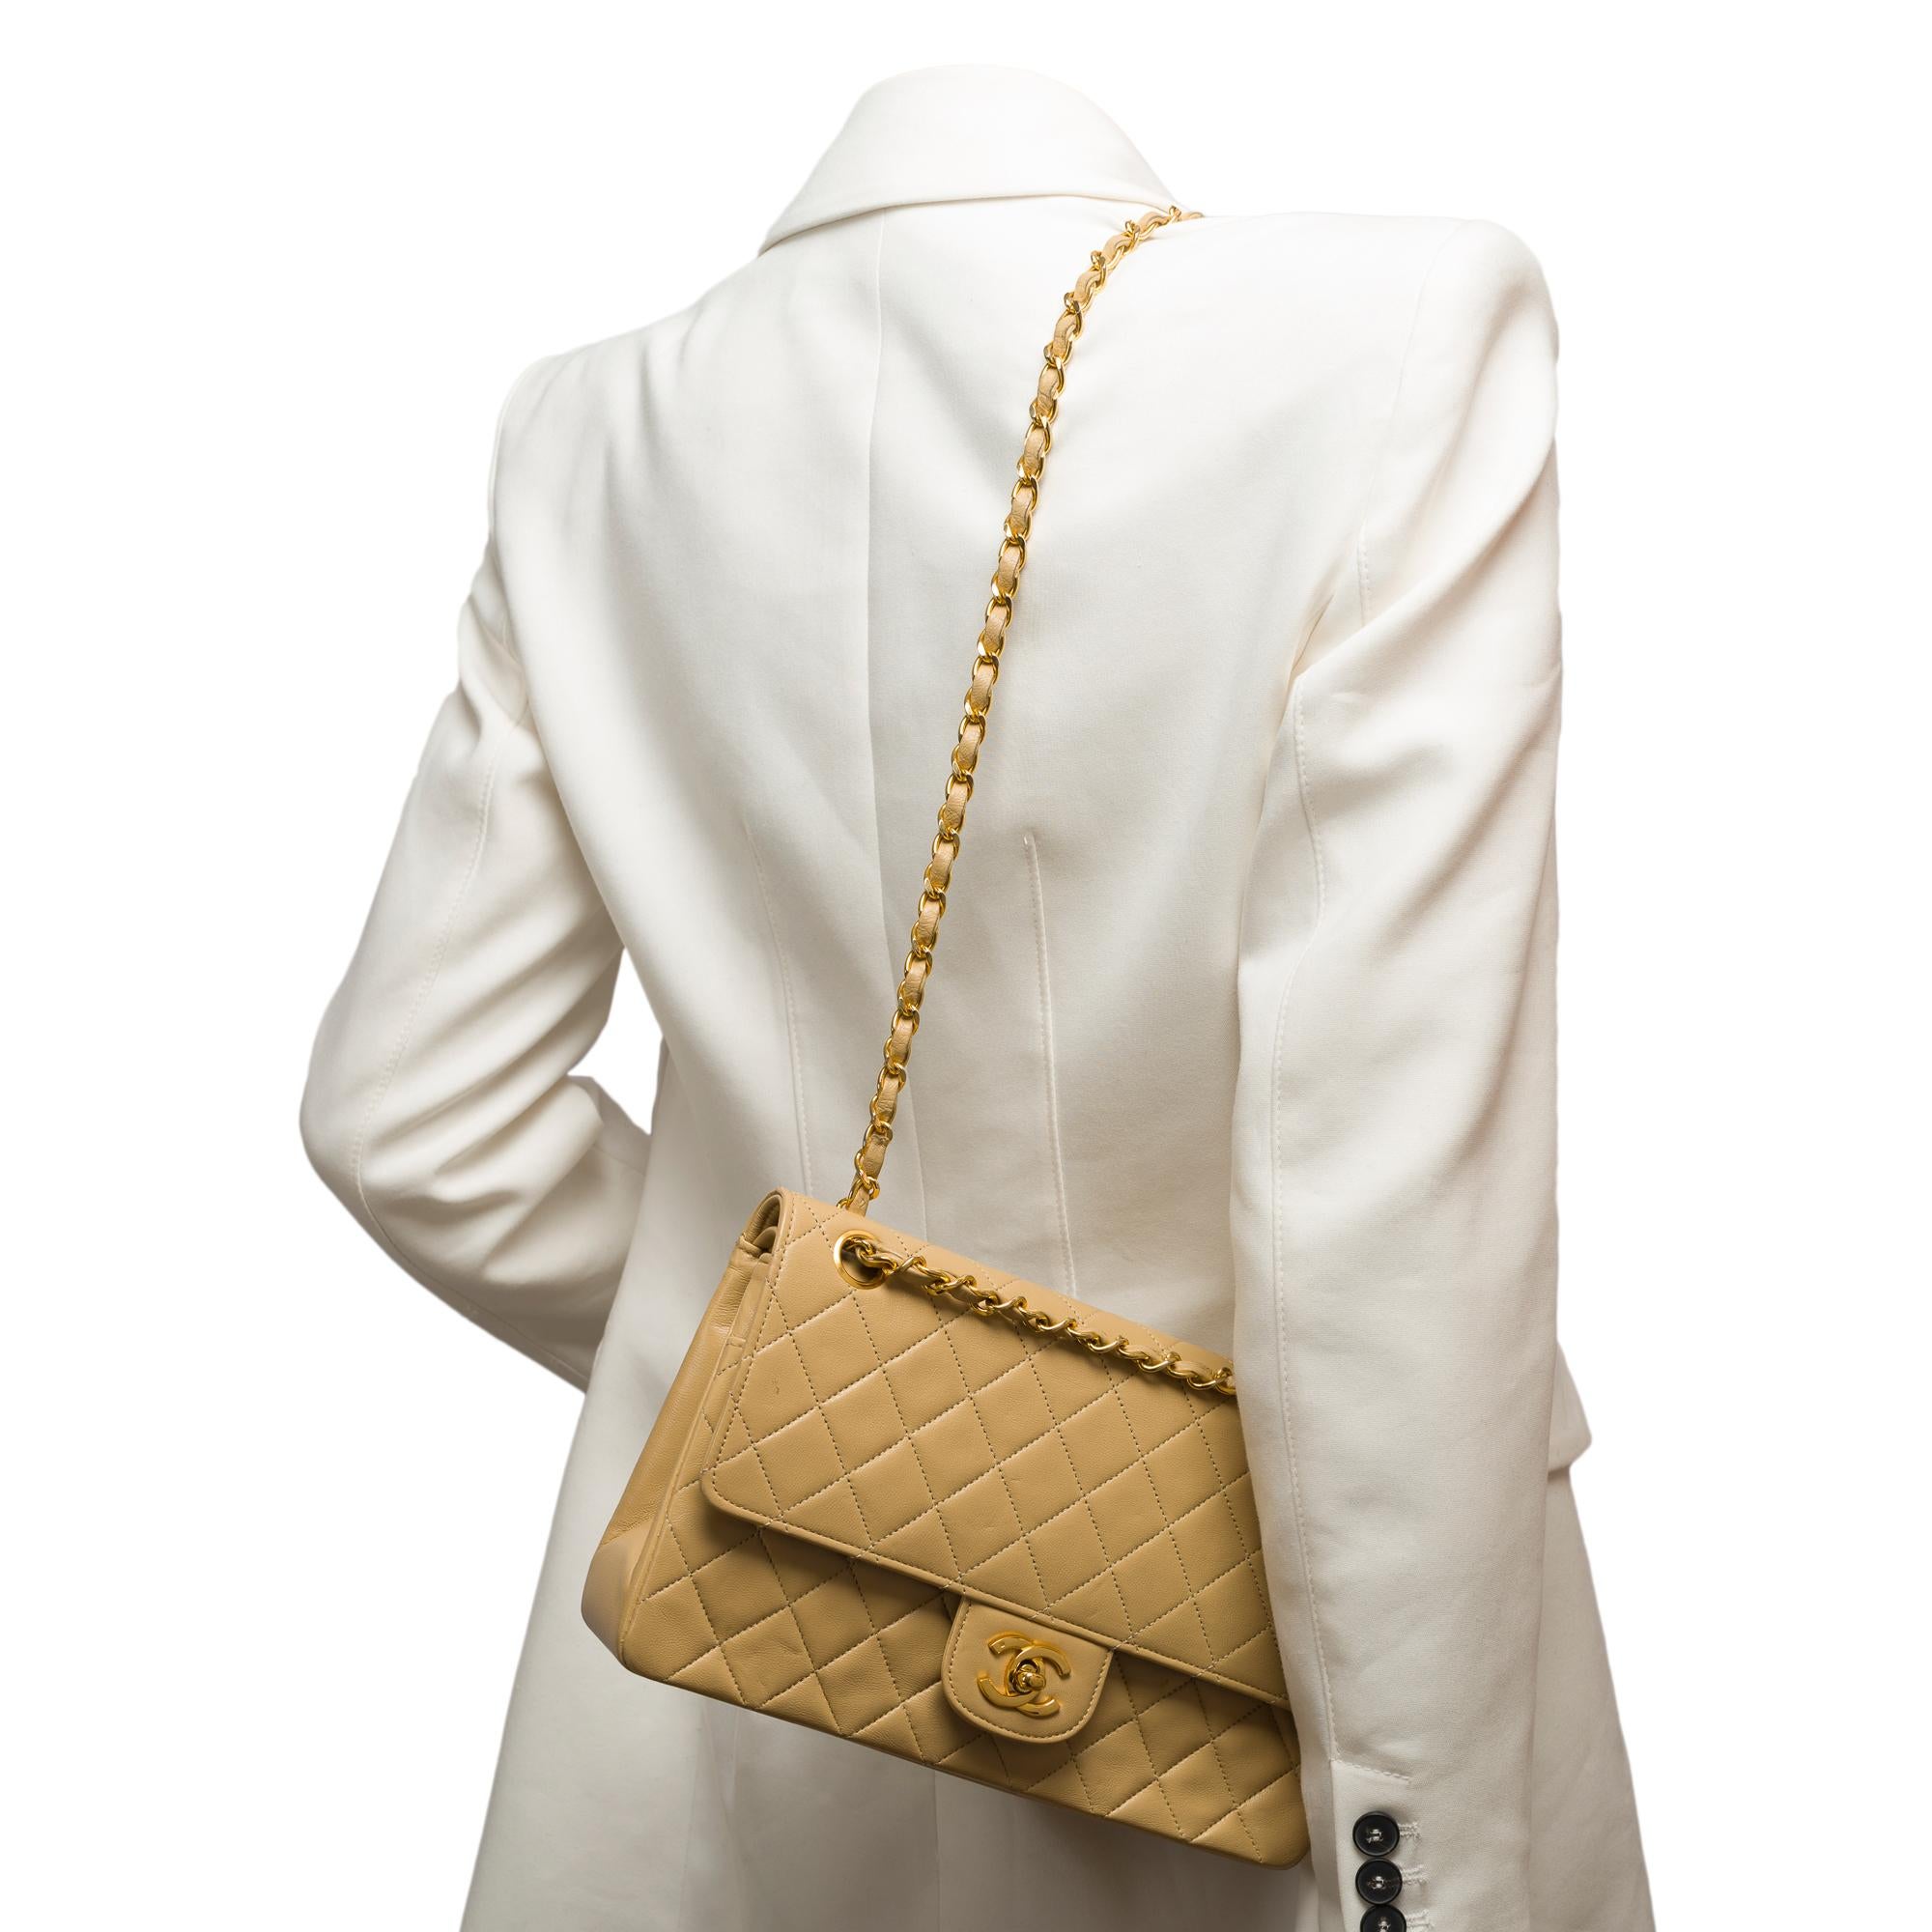 Chanel Timeless double flap shoulder bag in beige quilted lambskin leather, GHW 8